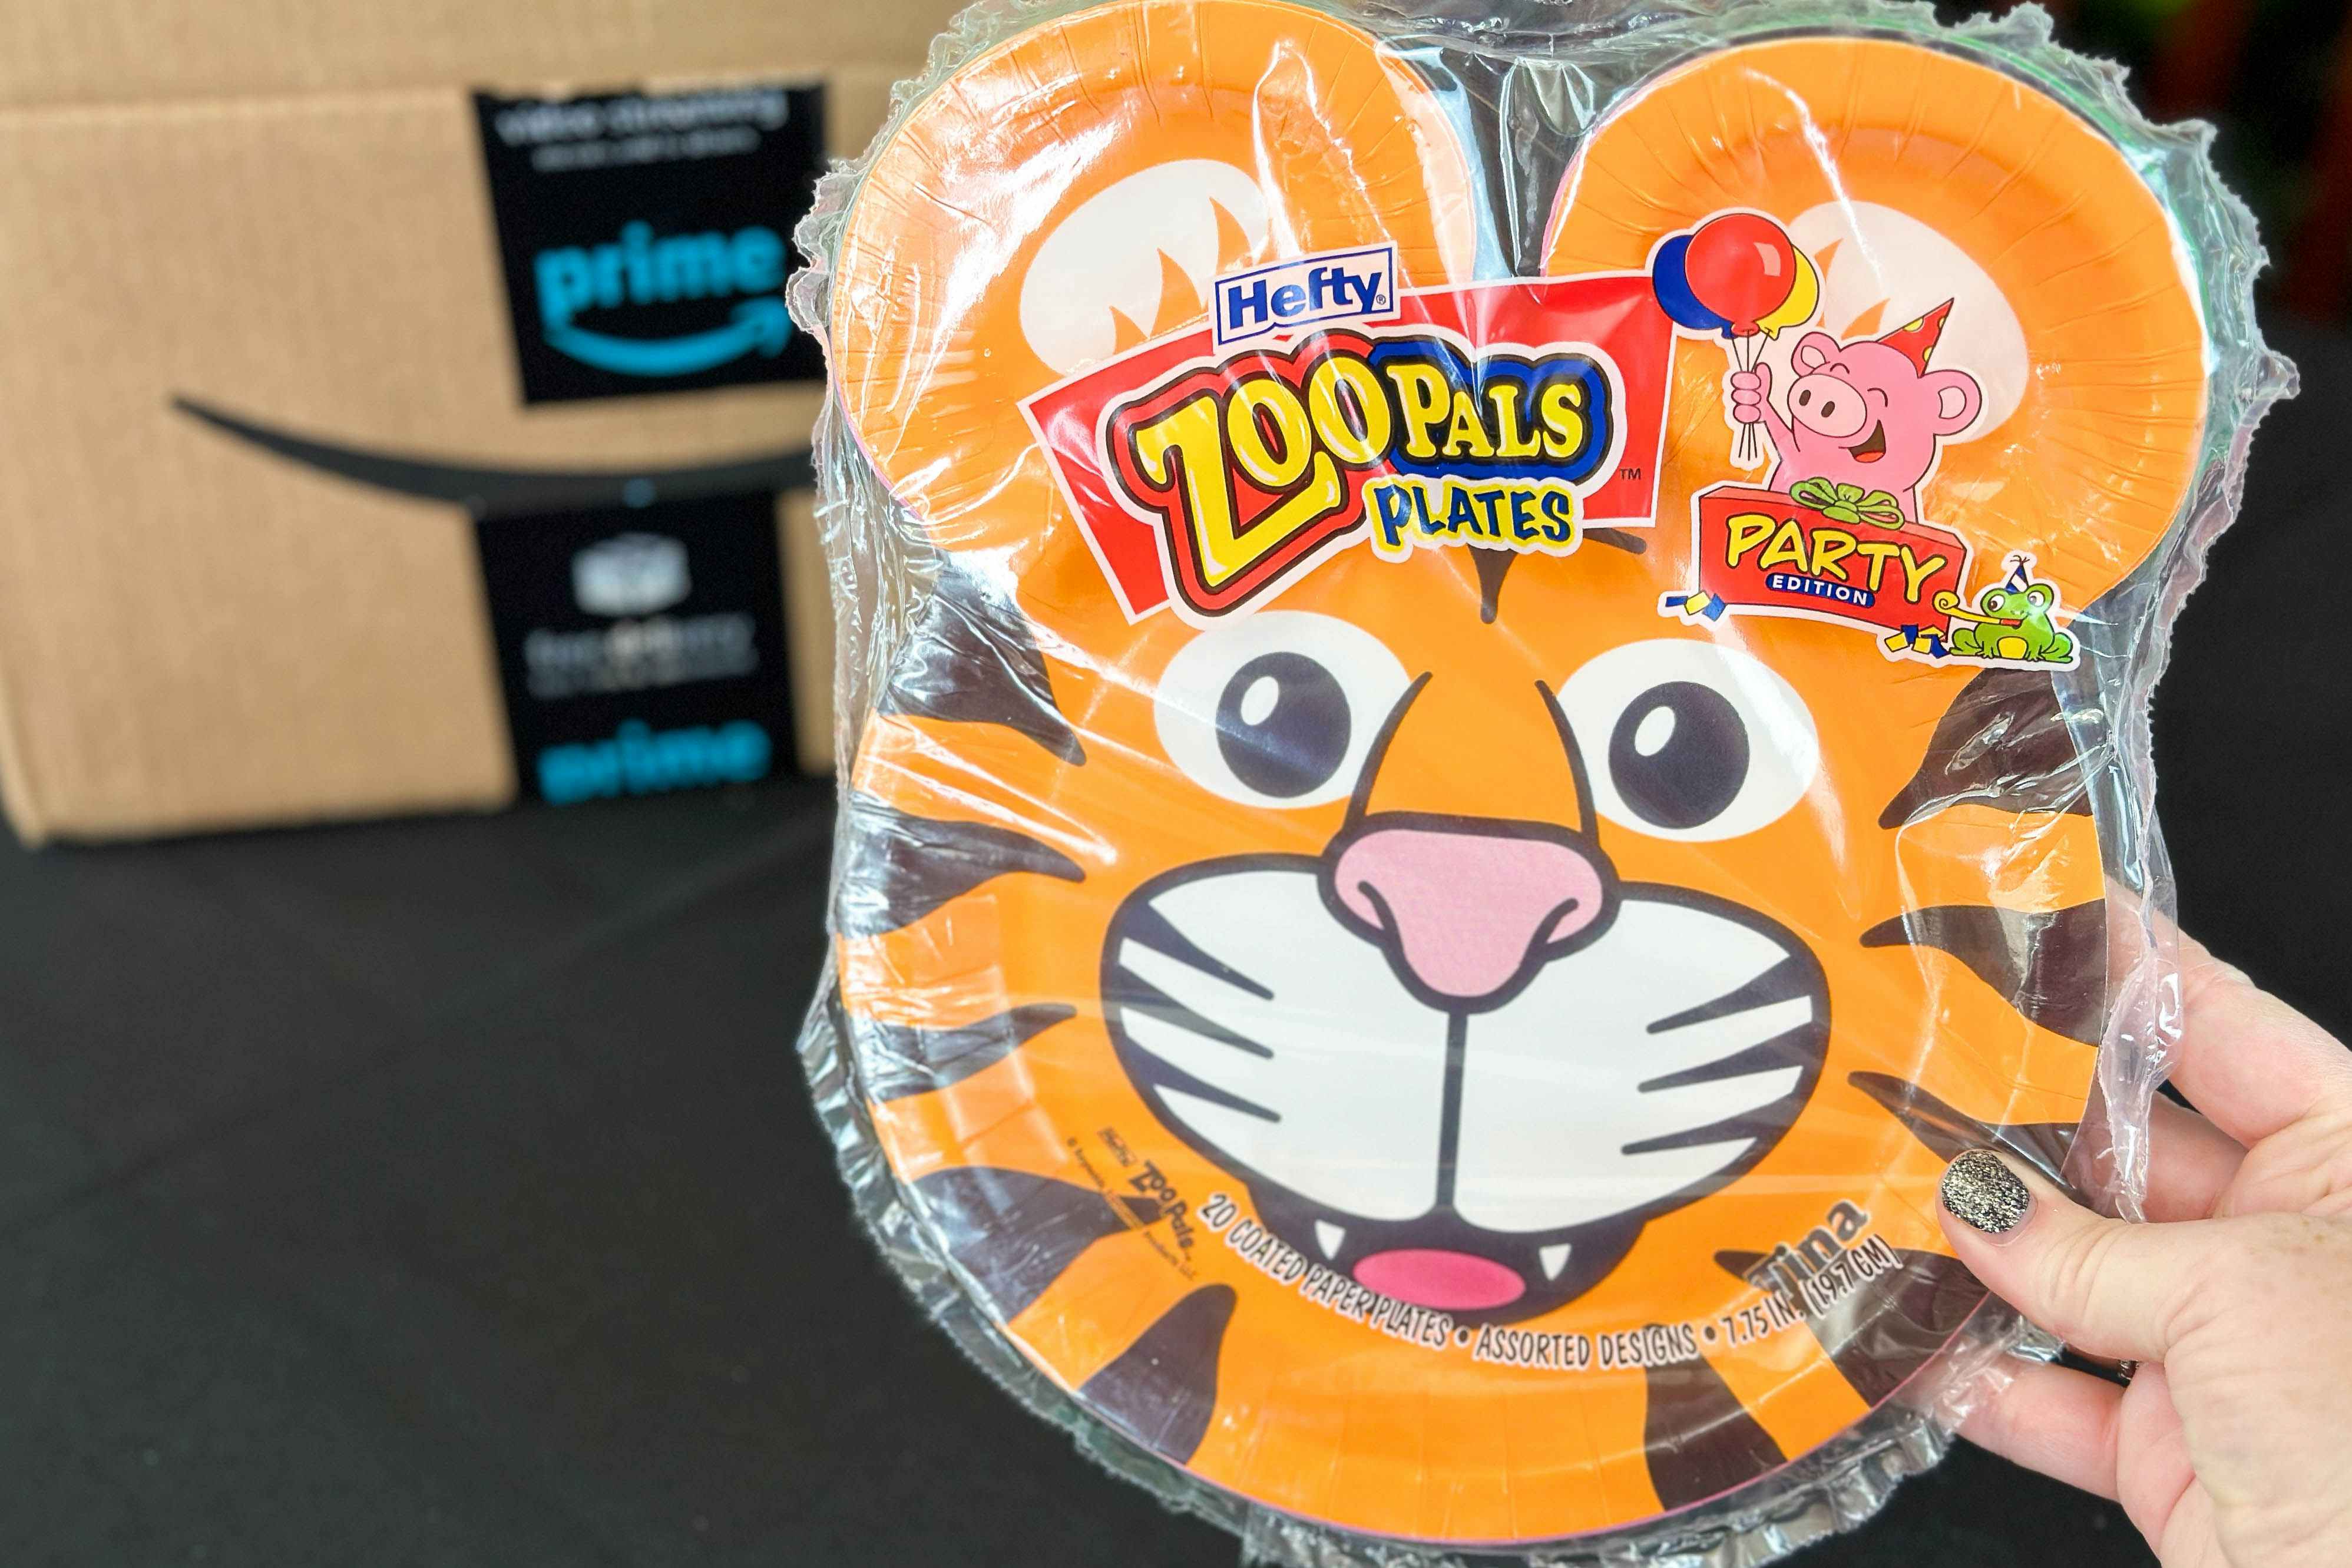  Hefty Zoo Pals Party Edition Paper Plates for Kids